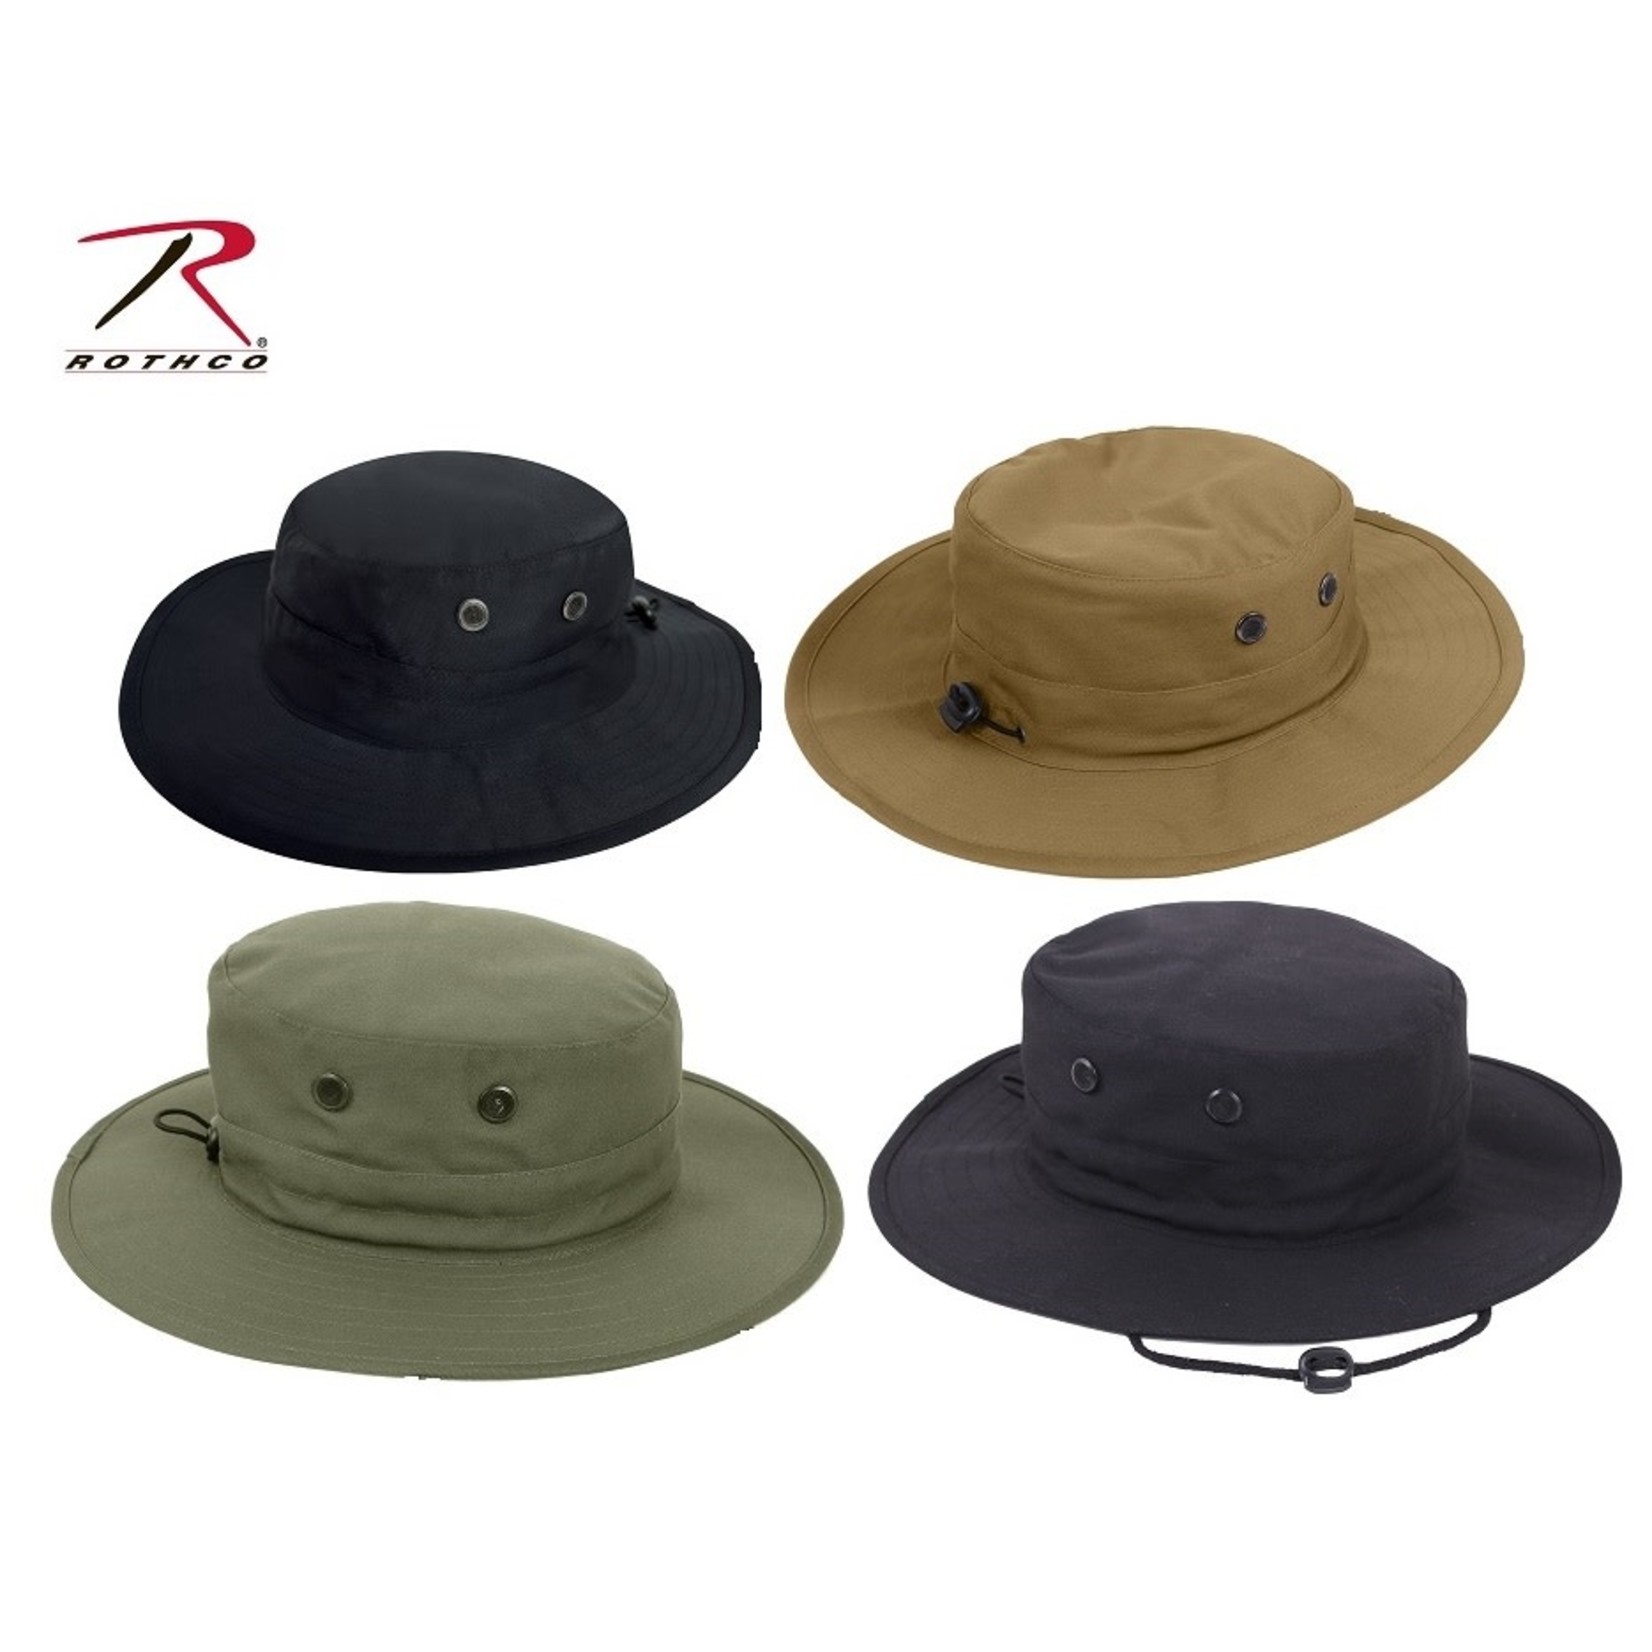 Rothco Rothco Adjustable Solid Color Boonie Hat